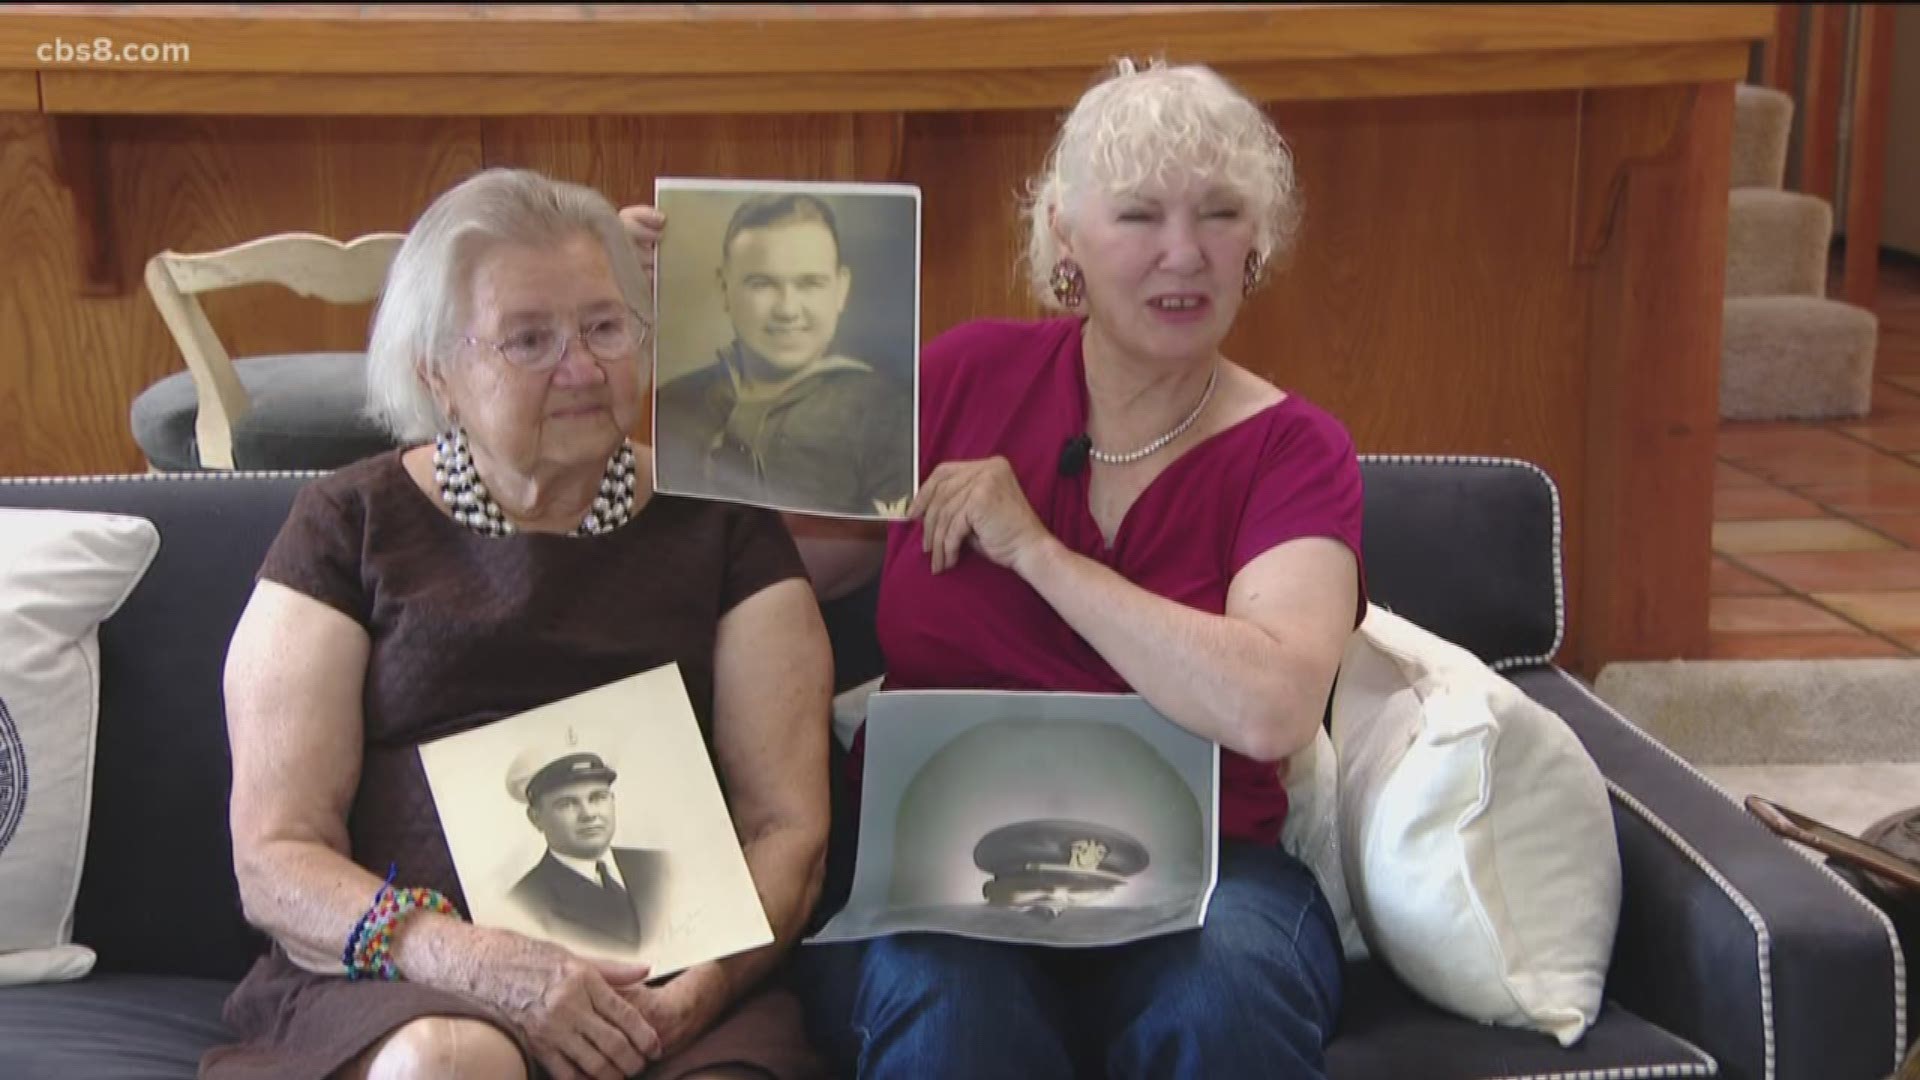 Imagine finding out after almost 80 years that you have an older sister who had been waiting nearly her entire life to meet you. DNA technology helped facilitate an emotional meeting for one Chula Vista woman whose 87-year-old half-sister had grown up in Panama. This week, the two sisters finally had the opportunity to meet face-to-face.